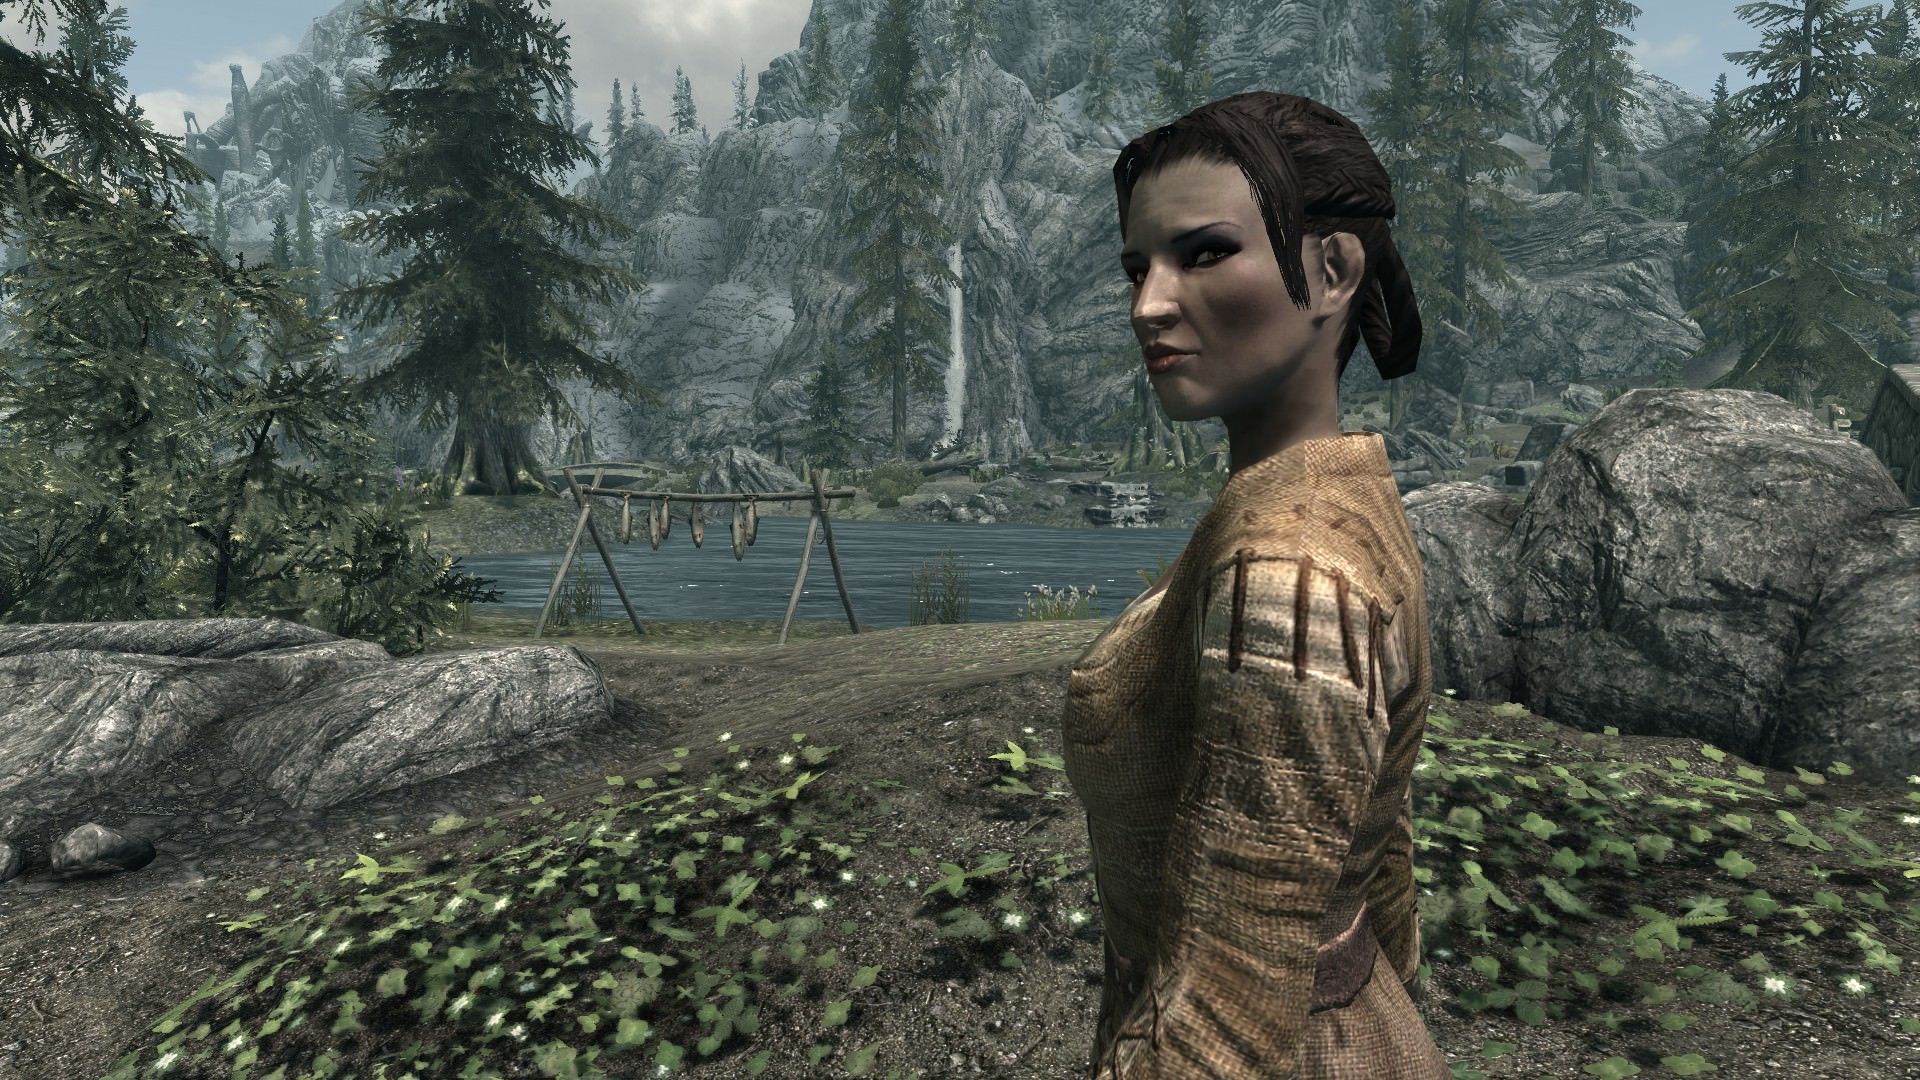 Camilla Valerius gives the Dragonborn the sideeye in Skyrim